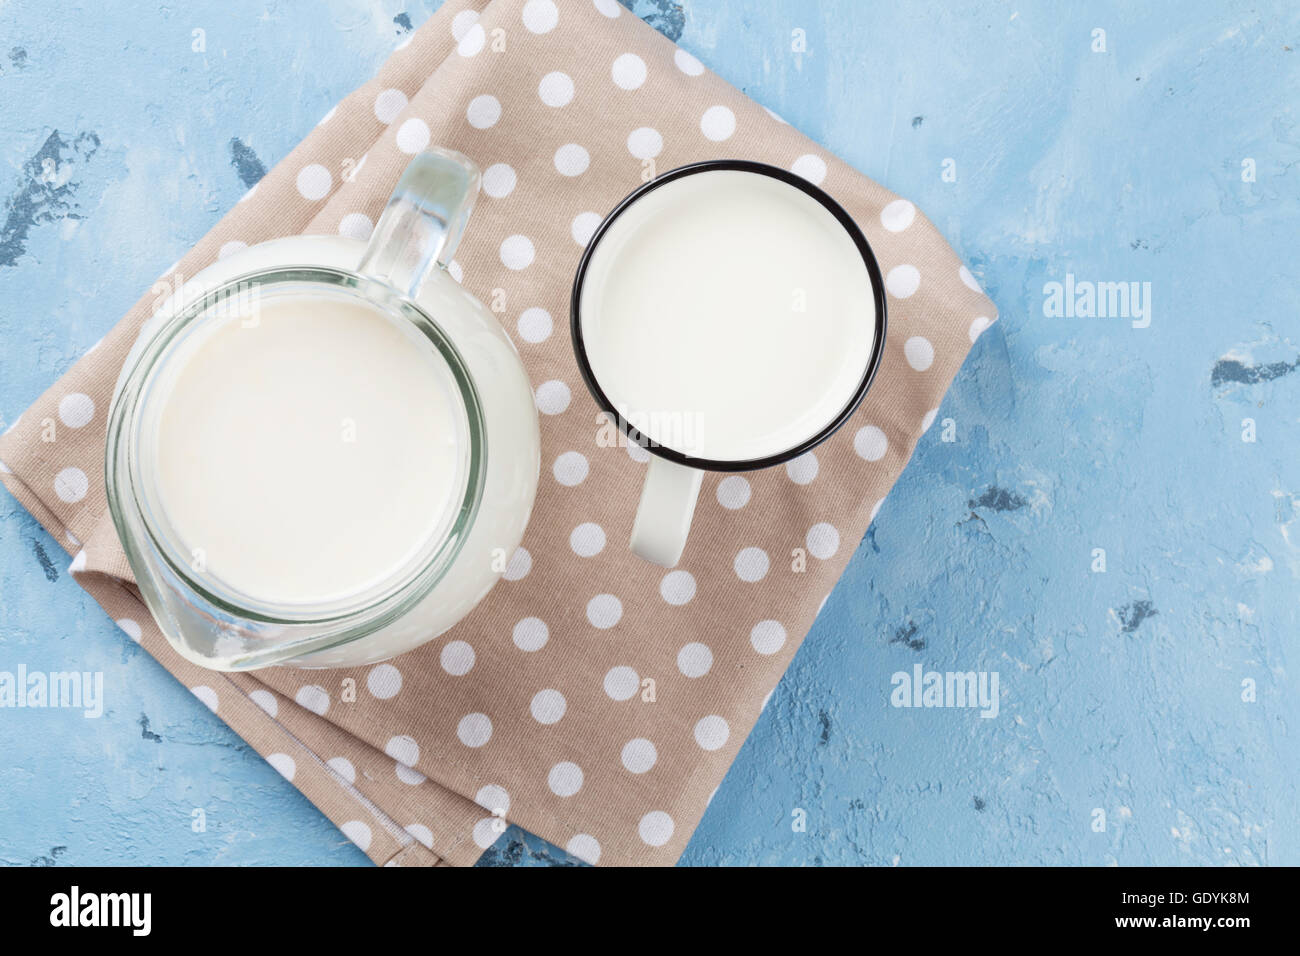 Milk jug and cup on stone table. Dairy products. Top view Stock Photo